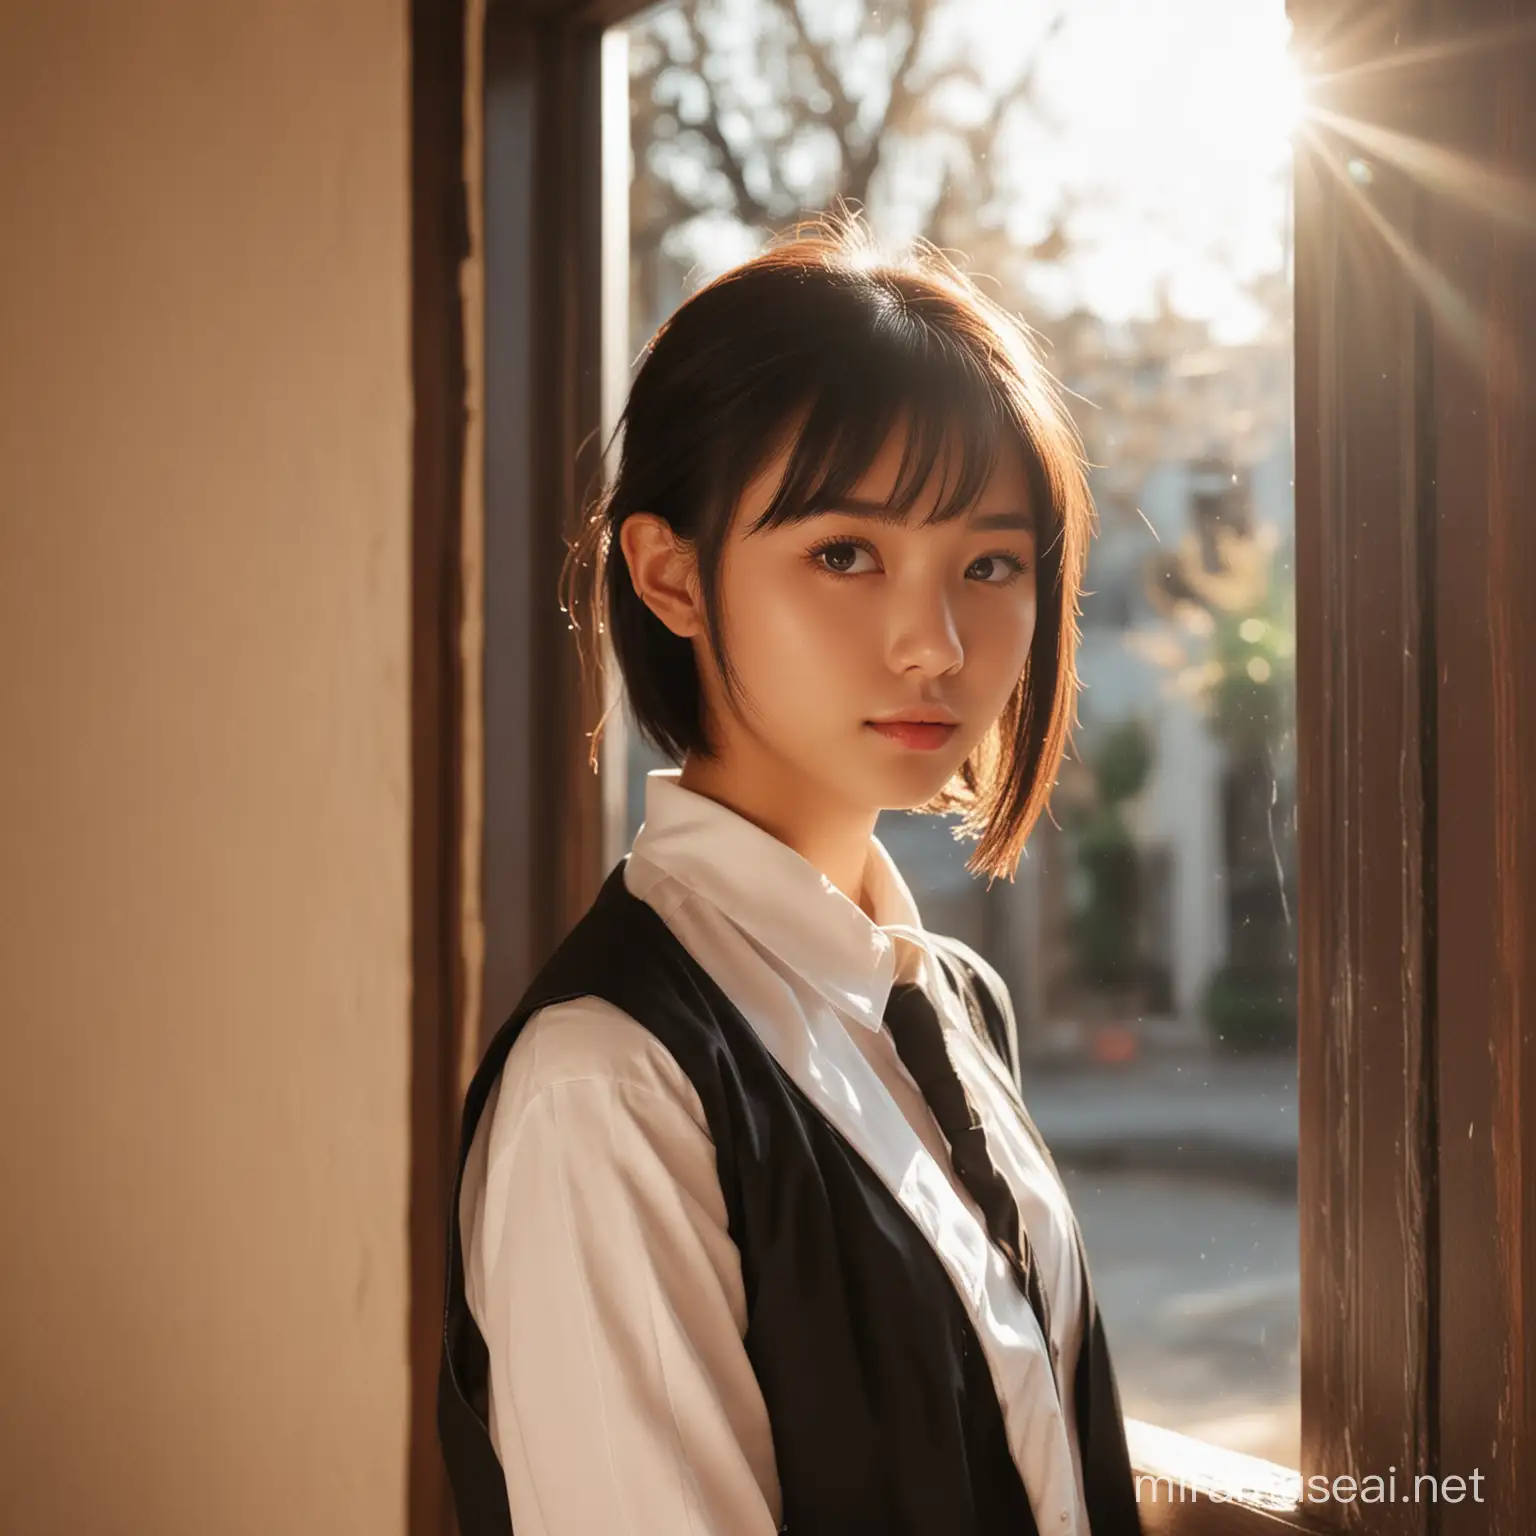 ～ Afternoon Gleam ～
In the luminous afternoon, a moment of vivacity is captured within these walls. The clear, bright attire reflects the gentle flow of time, serene and full of light. Asia girl, girl, 18 years old, (beautiful live brown eyes with 3D reflection of light), black short hair, school uniform